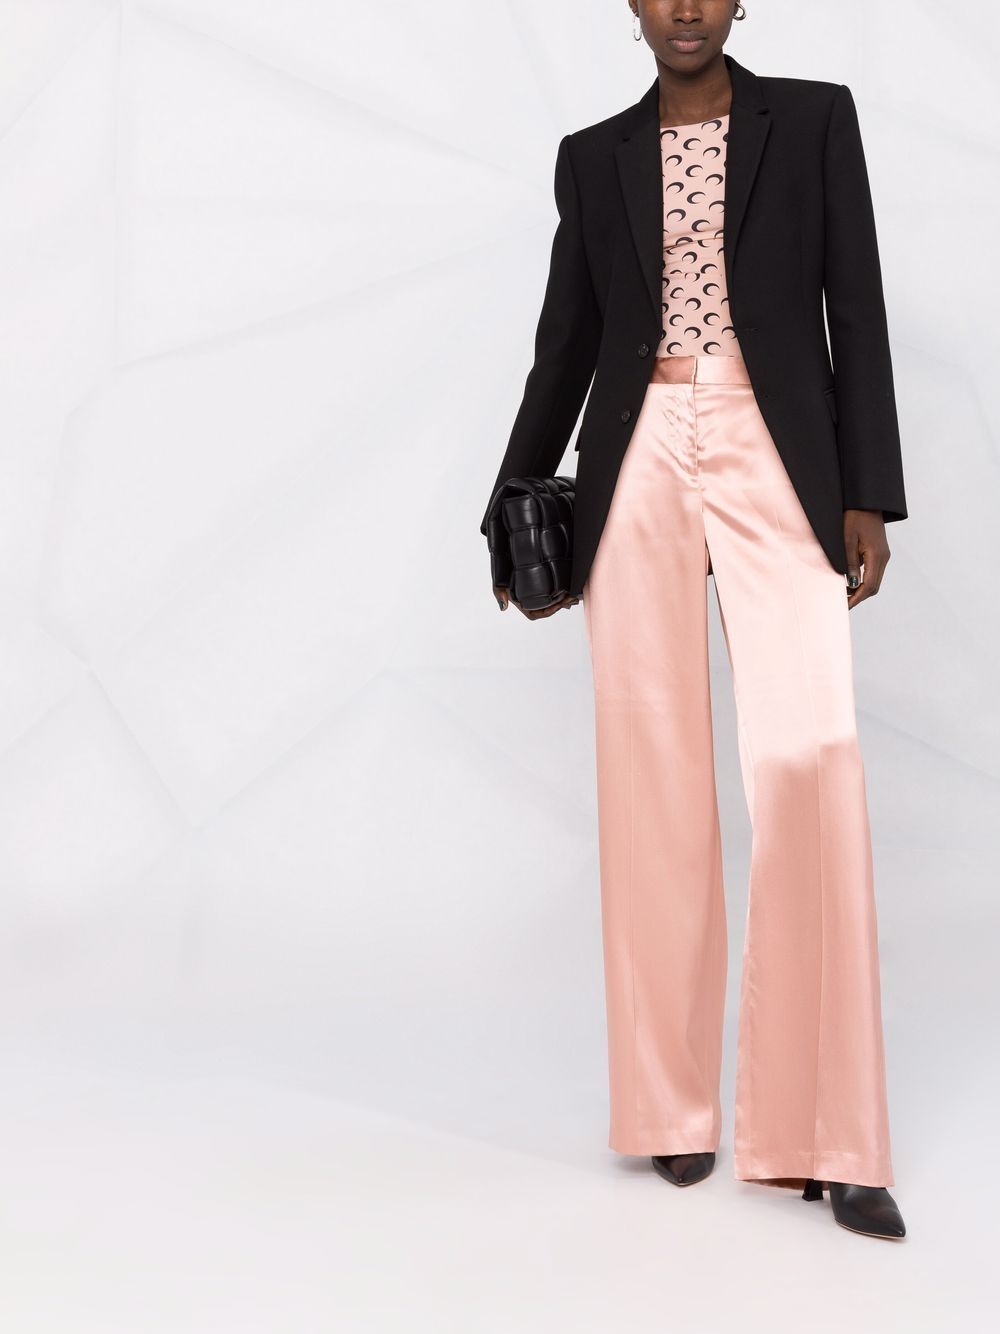 Rosie Assoulin Cut Out Knee Flared Trousers, $1,268, farfetch.com